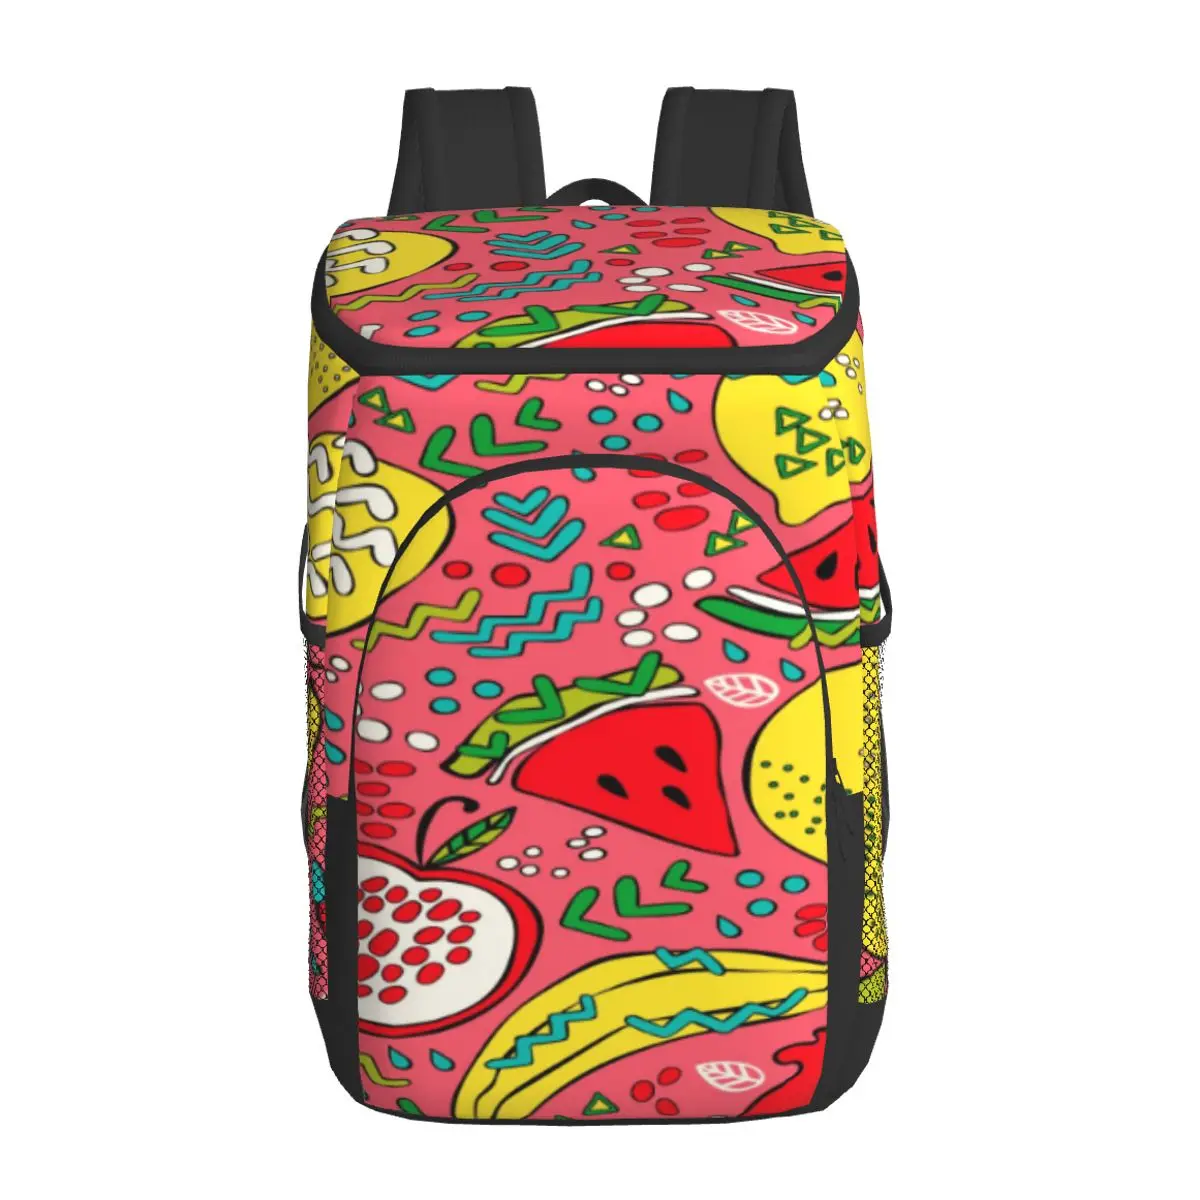 protable insulated thermal cooler waterproof lunch bag bright summer fruits picnic camping backpack double shoulder wine bag free global shipping